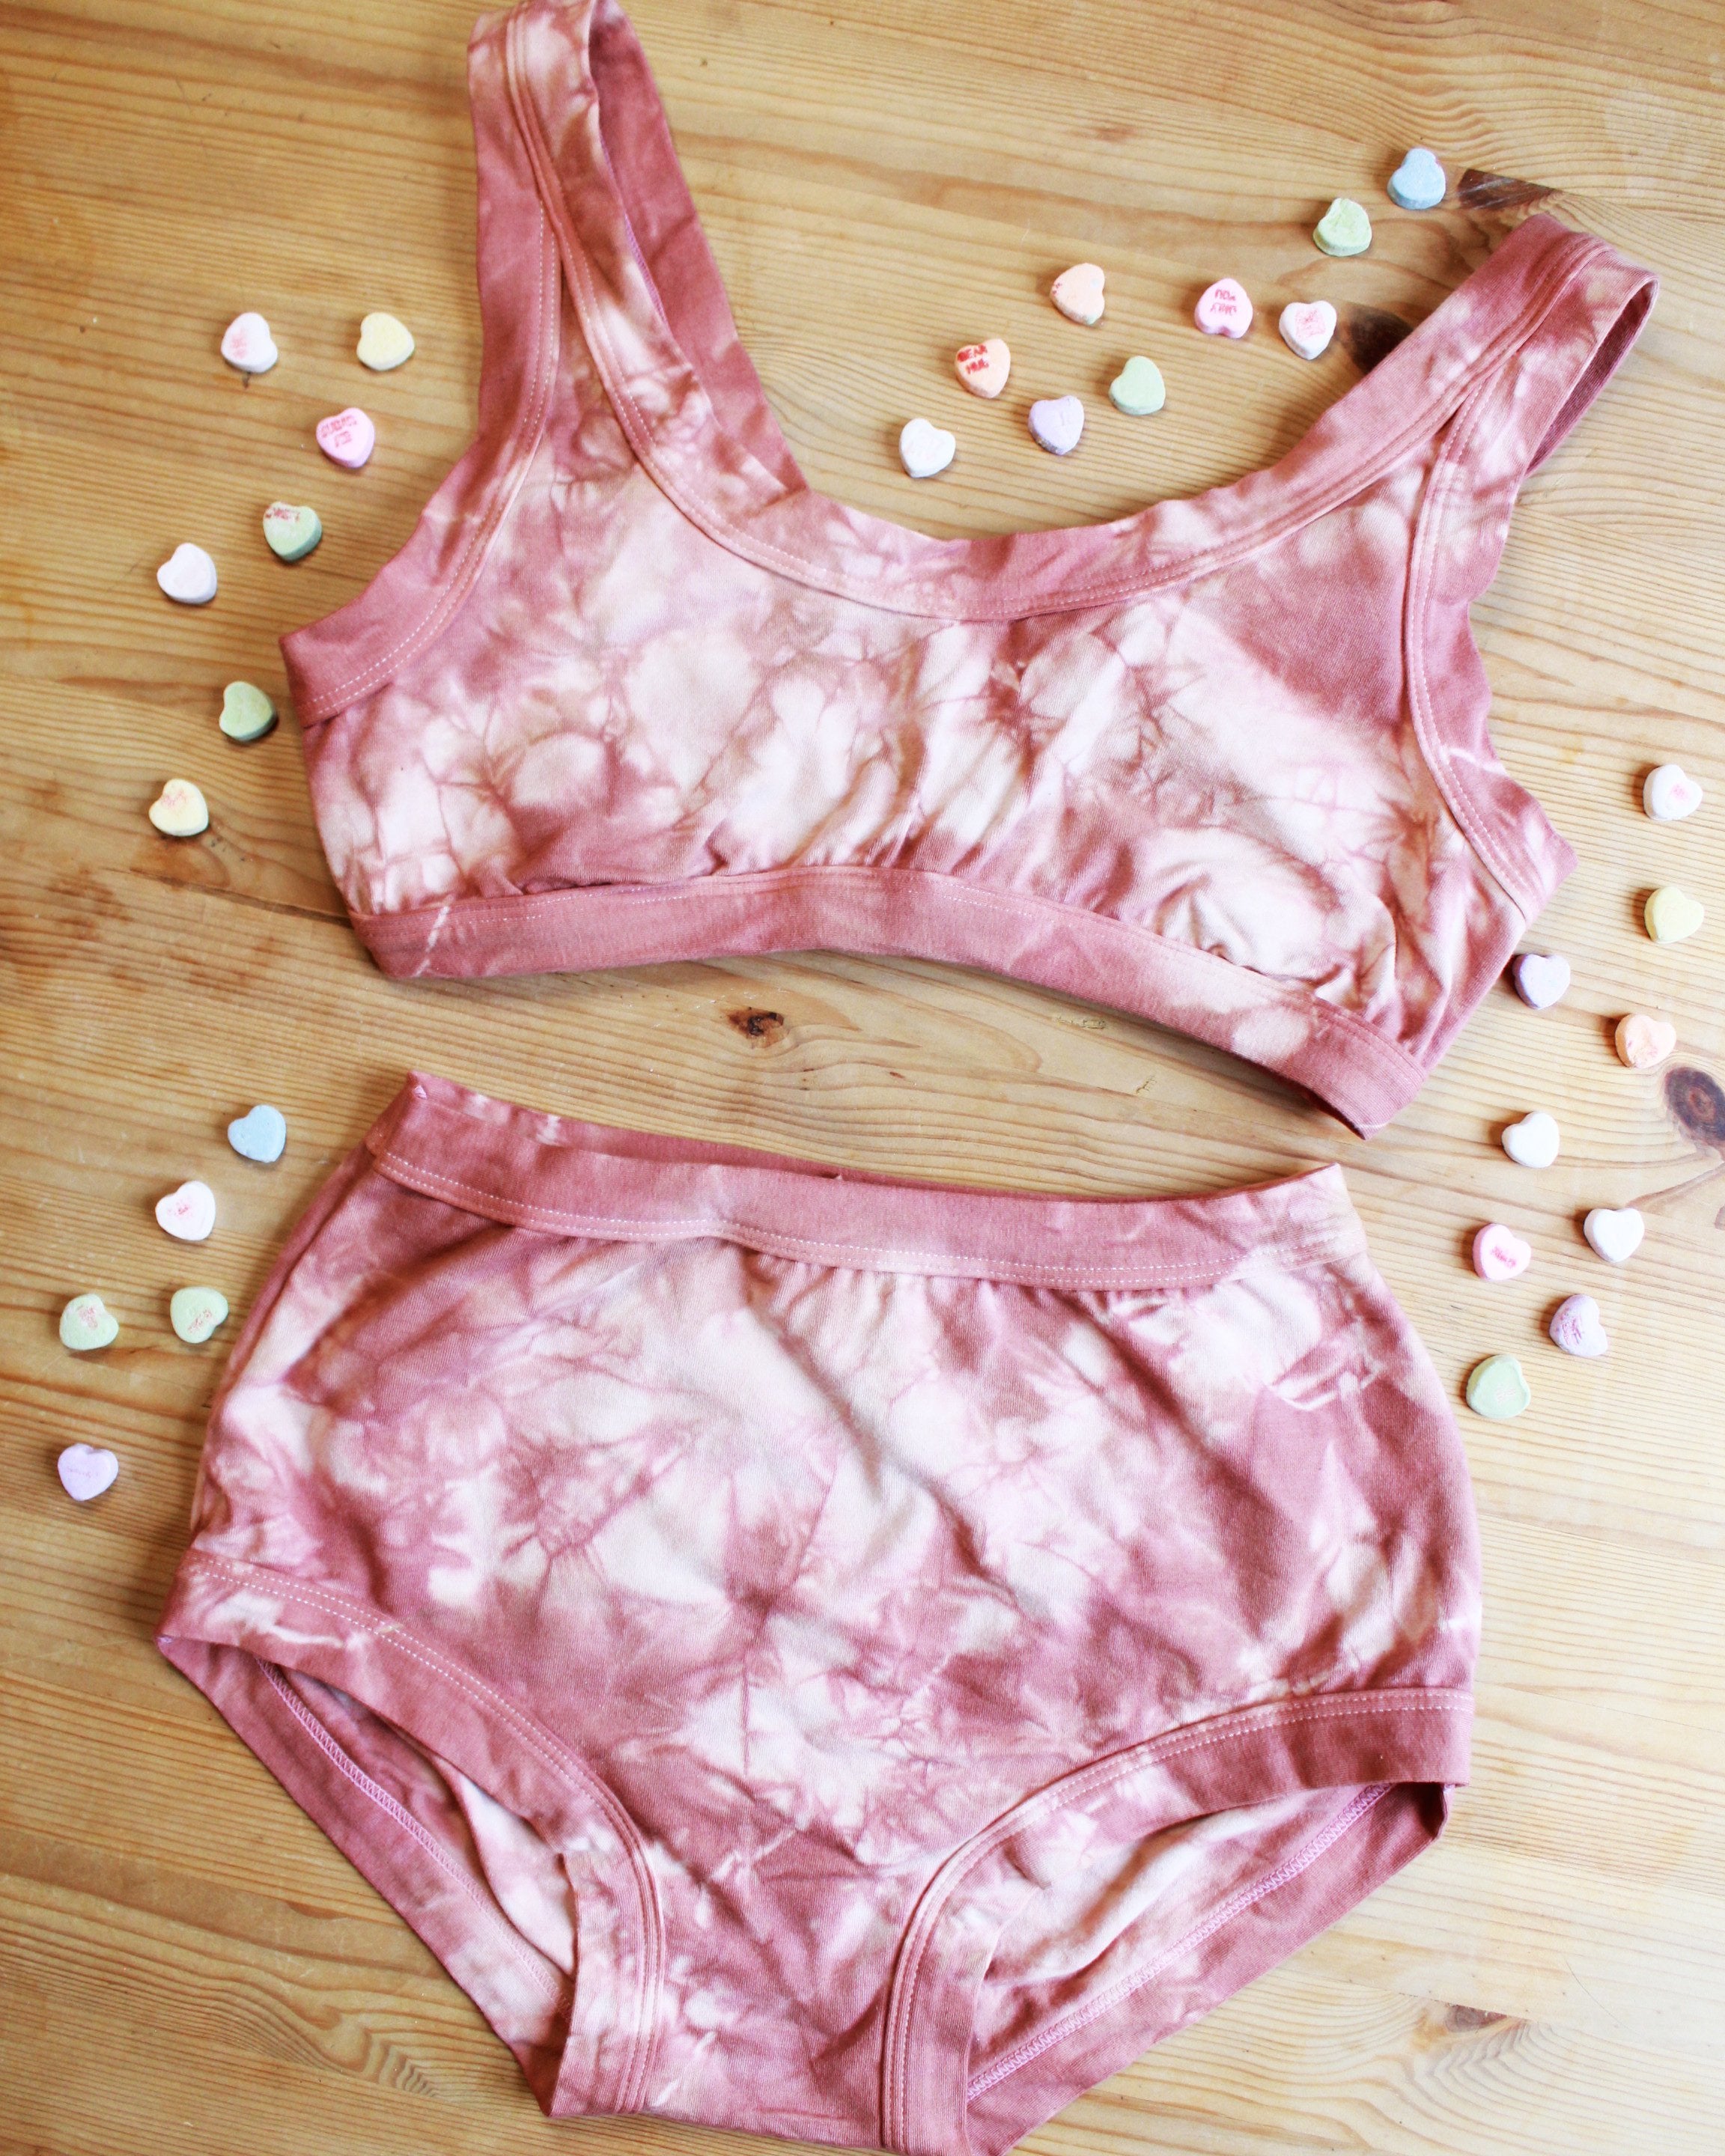 Flat-lay of Thunderpants organic cotton Bralette and Women's Original style underwear in limited edition hand dyed pink shibori tie dye.